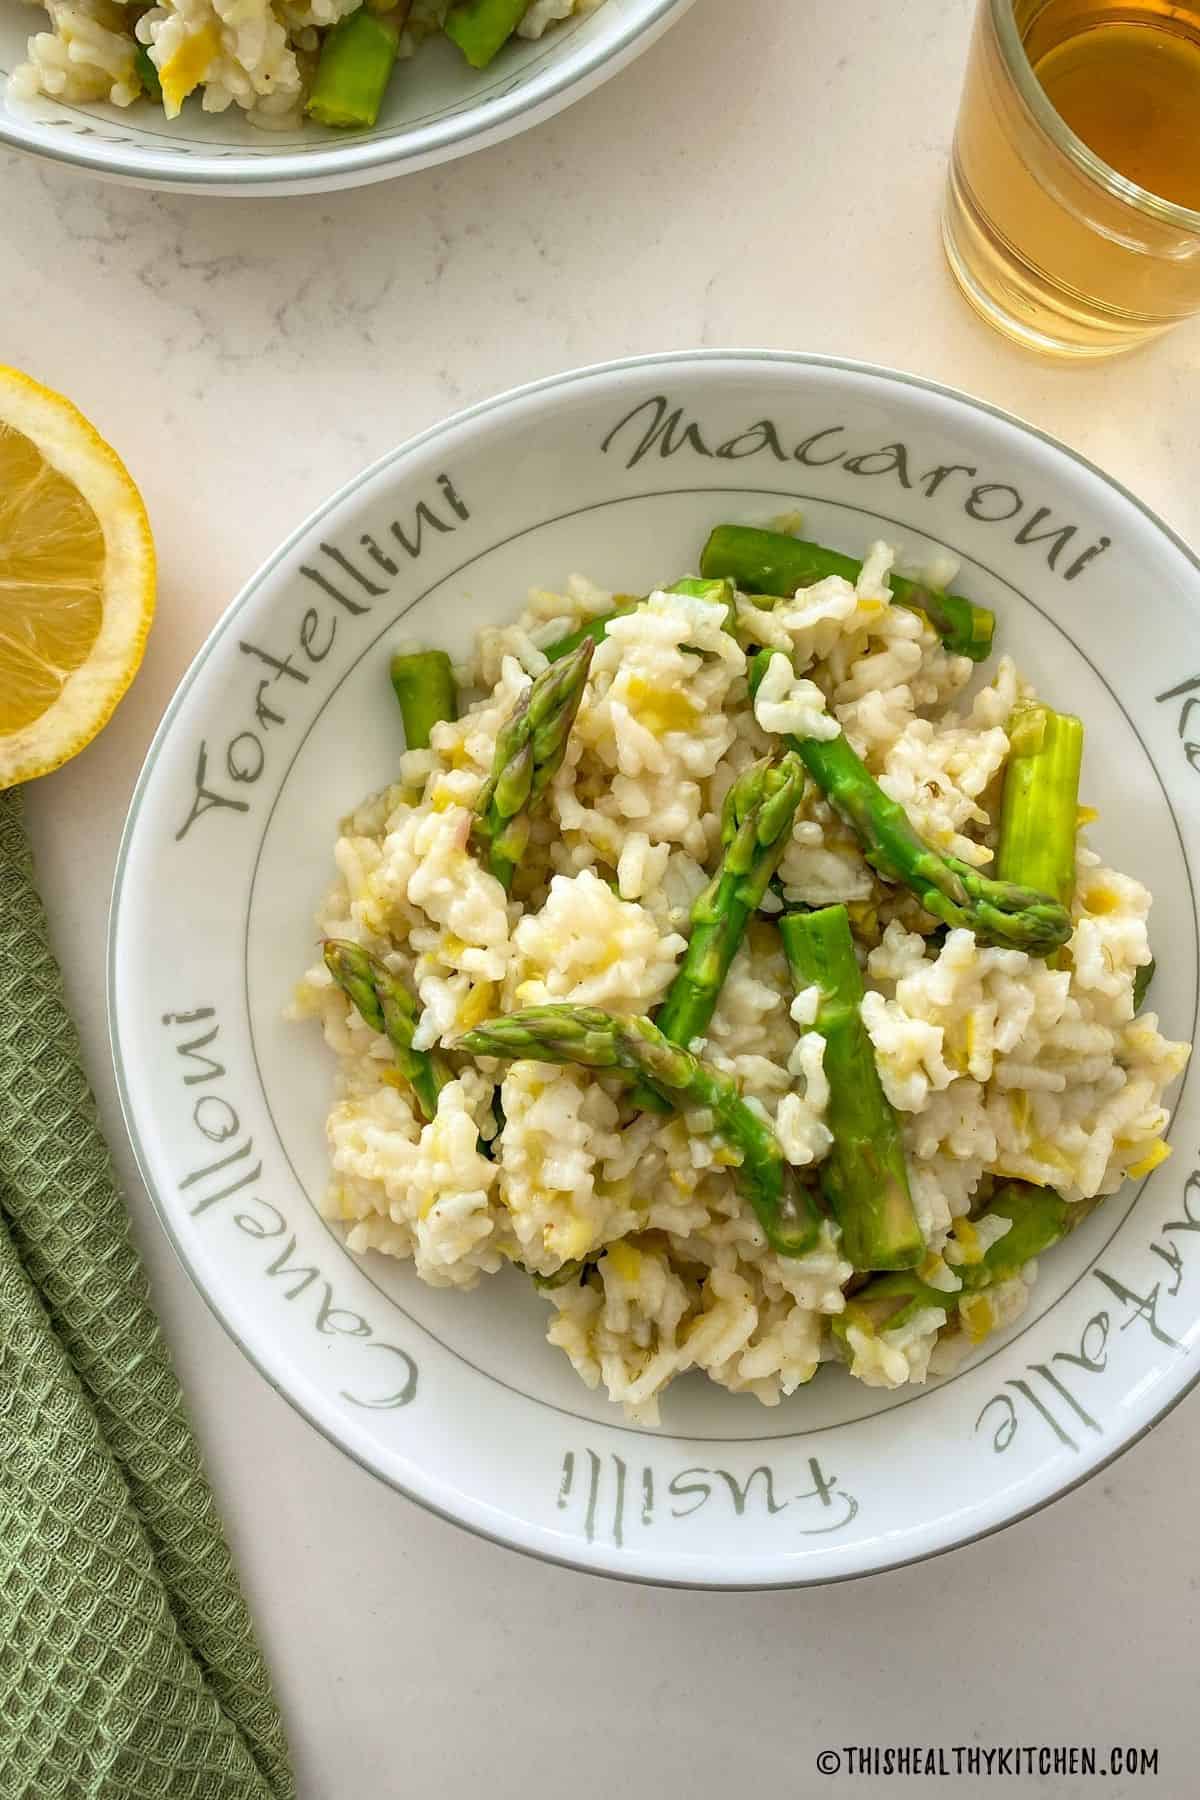 Risotto with asparagus in round bowl with lemon on the side.